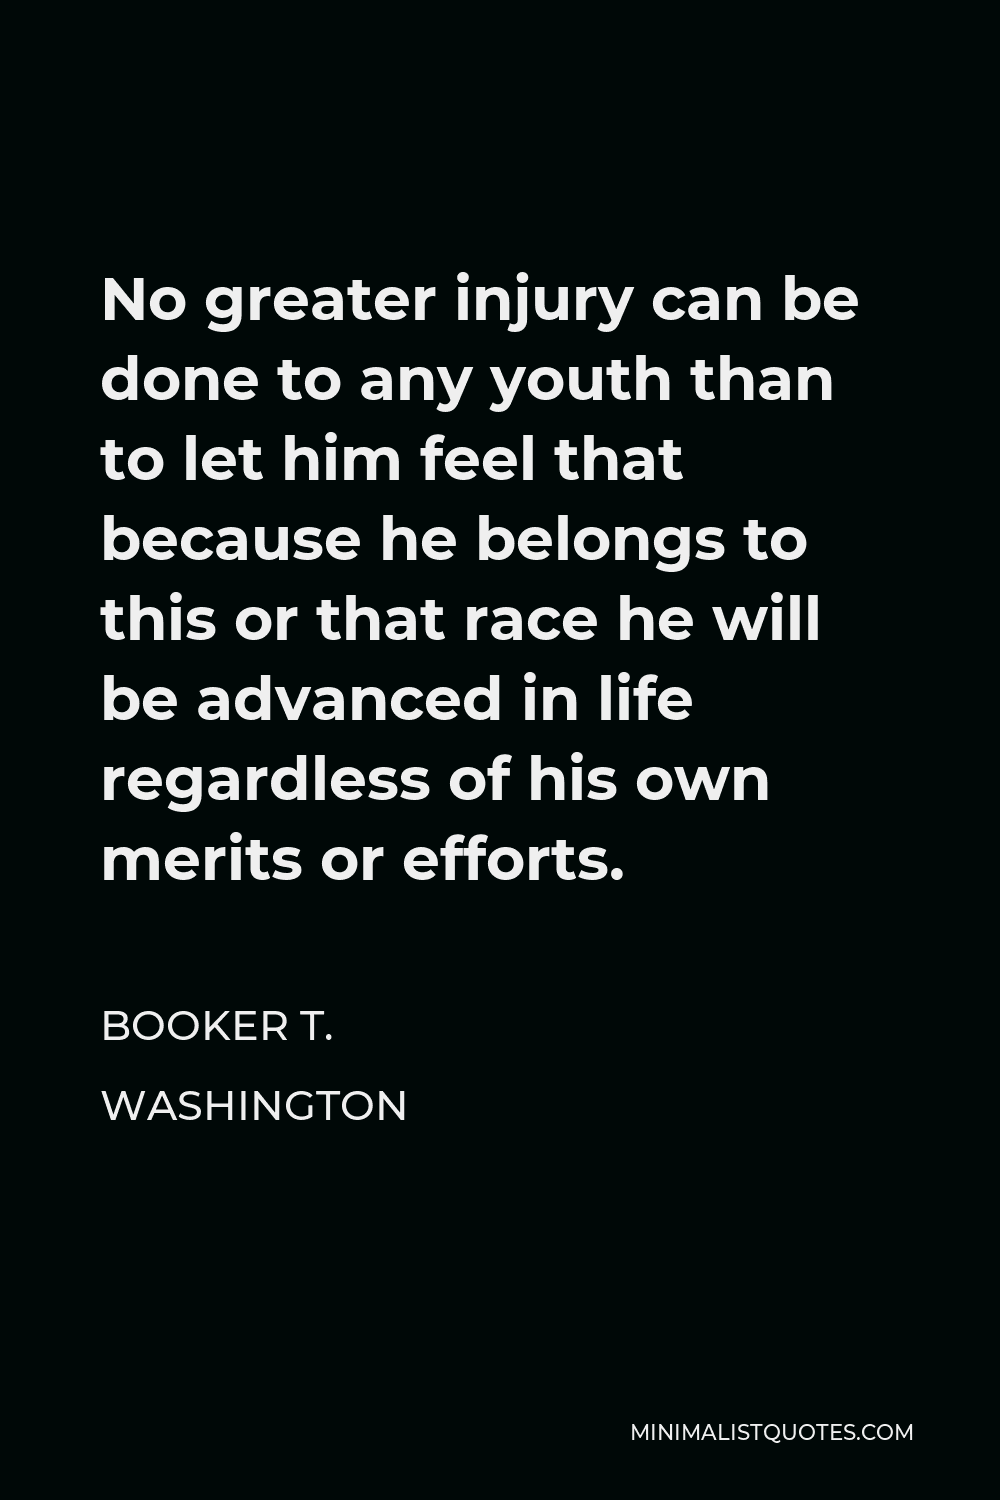 Booker T. Washington Quote - No greater injury can be done to any youth than to let him feel that because he belongs to this or that race he will be advanced in life regardless of his own merits or efforts.